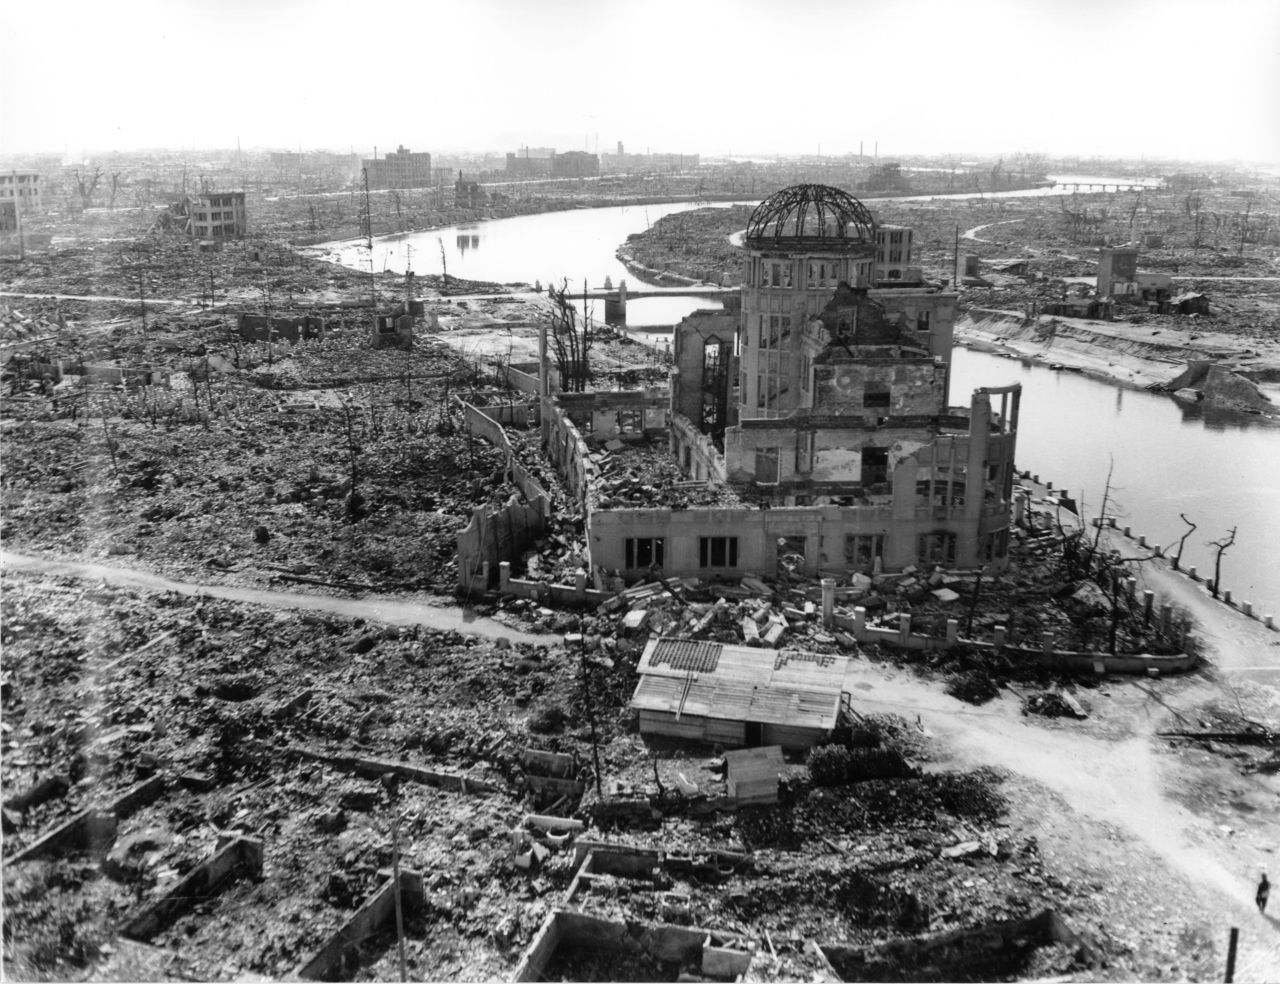 The remains of the Hiroshima Prefectural Commercial Exhibition Hall, now known as the A-Bomb Dome or Genbaku Dome, and the area around the hypocenter of the bomb. Photograph taken in November 1945 by the US Army. (Courtesy Hiroshima Peace Memorial Museum)